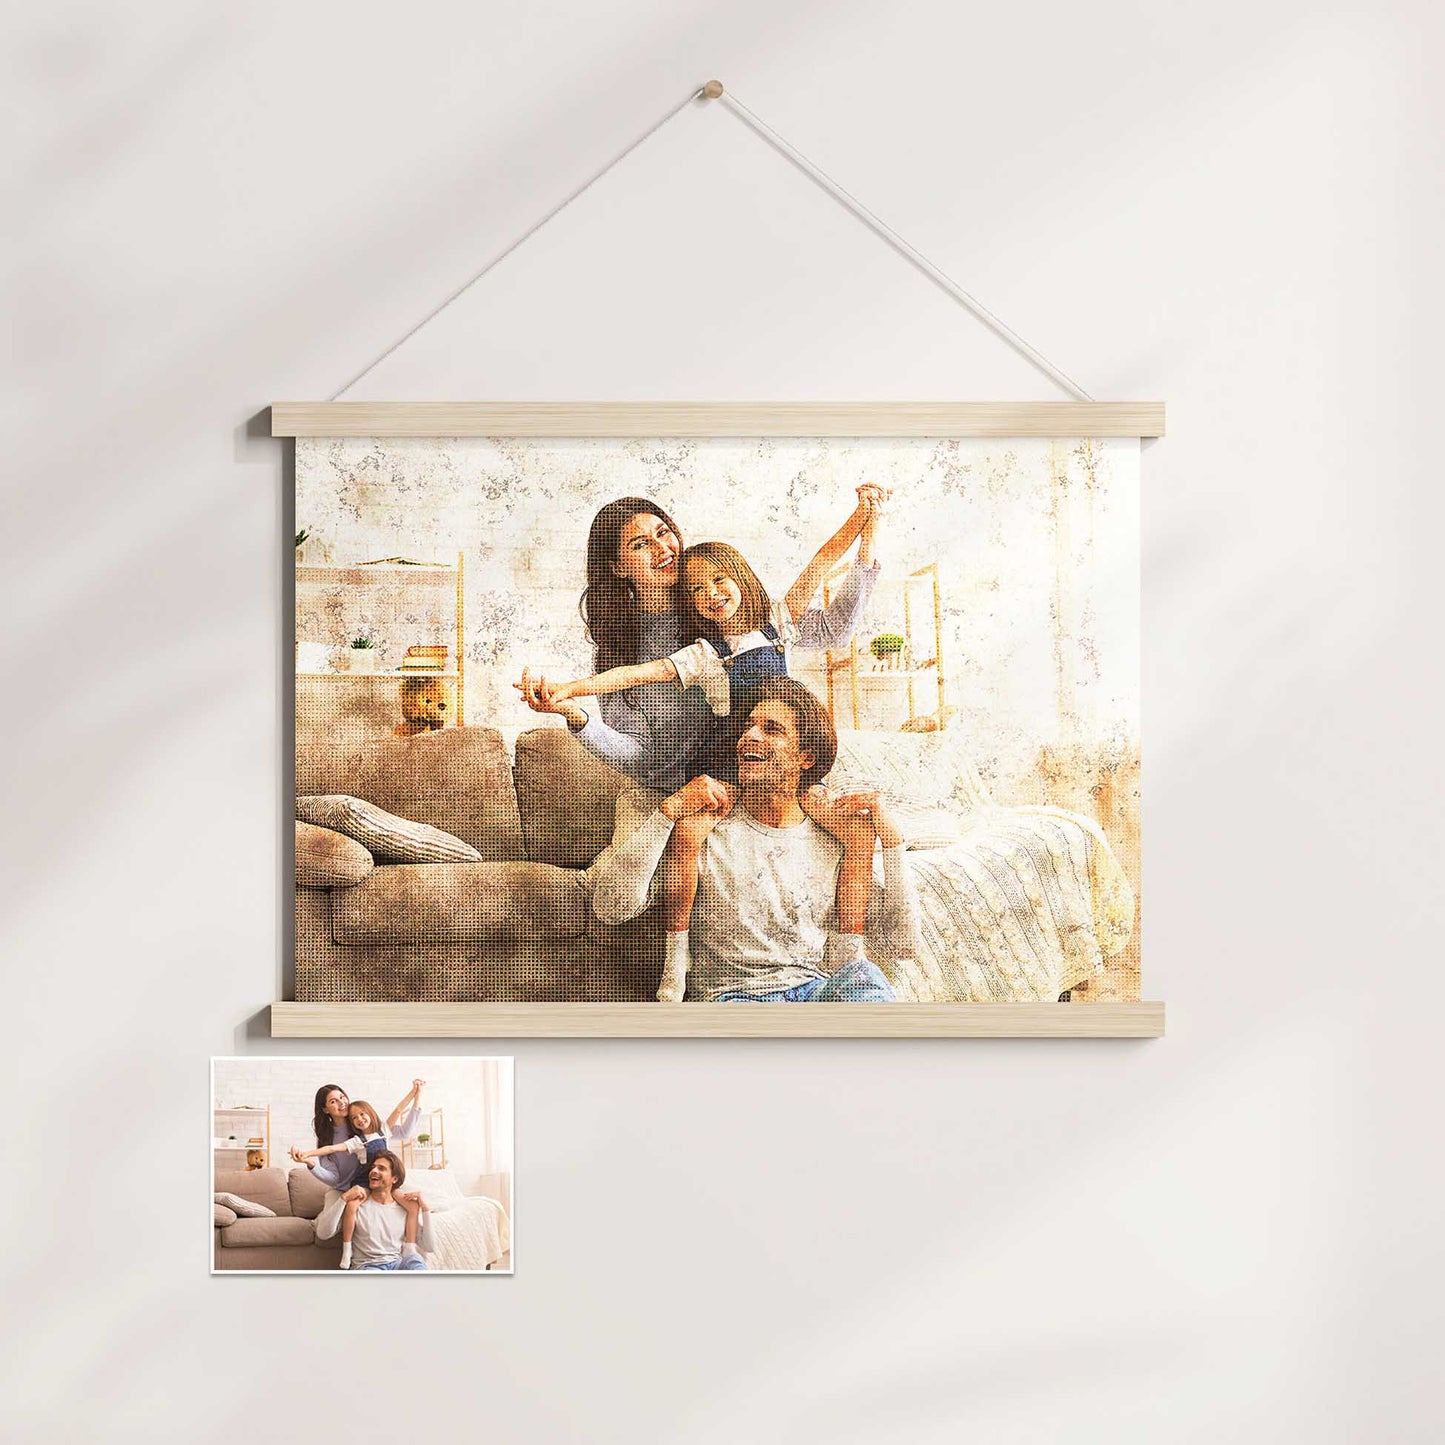 Experience the energy and absolute fun of the Personalised Grunge FX Poster Hanger. Its unique design and cool retro grunge effect create a captivating wall art decor that adds a vibrant and lively atmosphere to any space